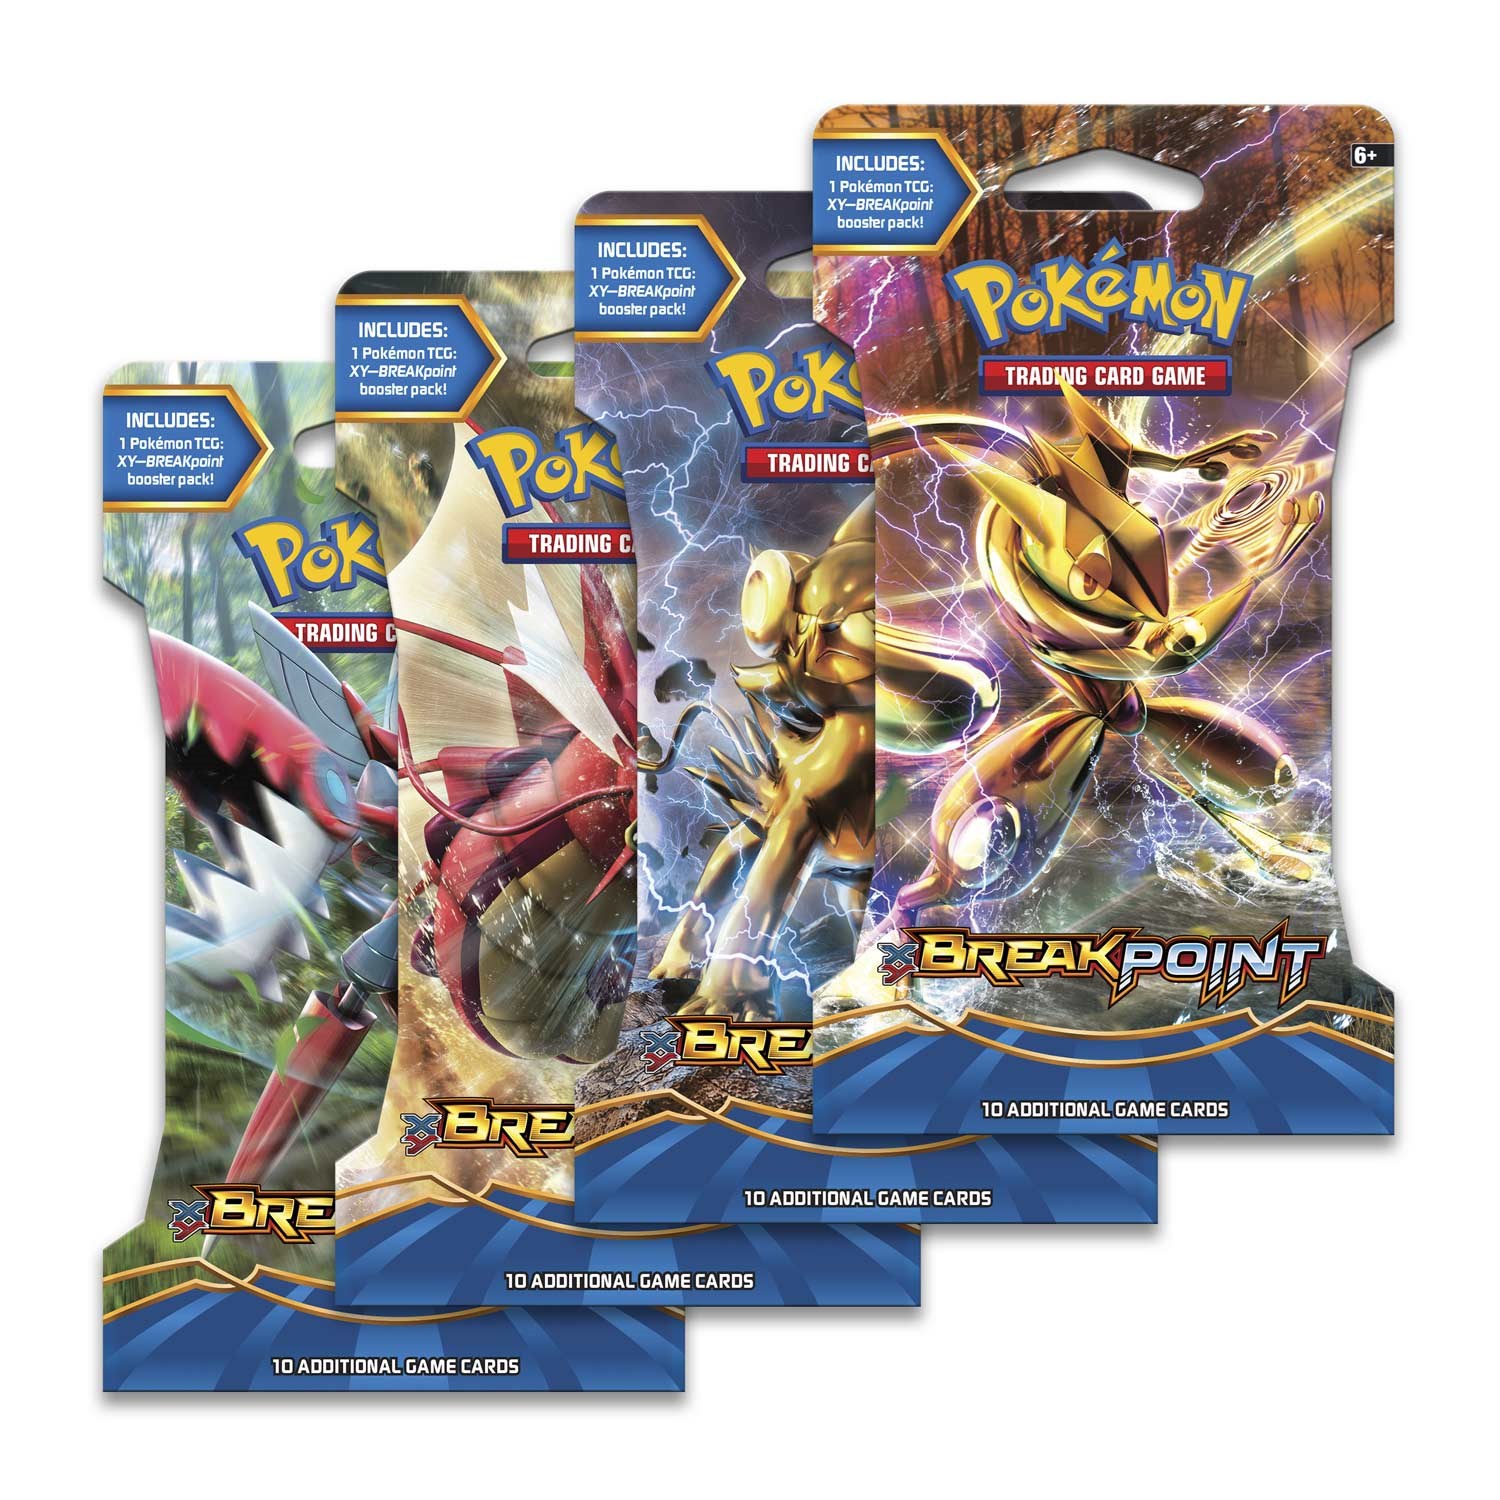 Pokémon TCG XY BREAKpoint Sleeved Booster Pack FBA_152-80070 for sale online 